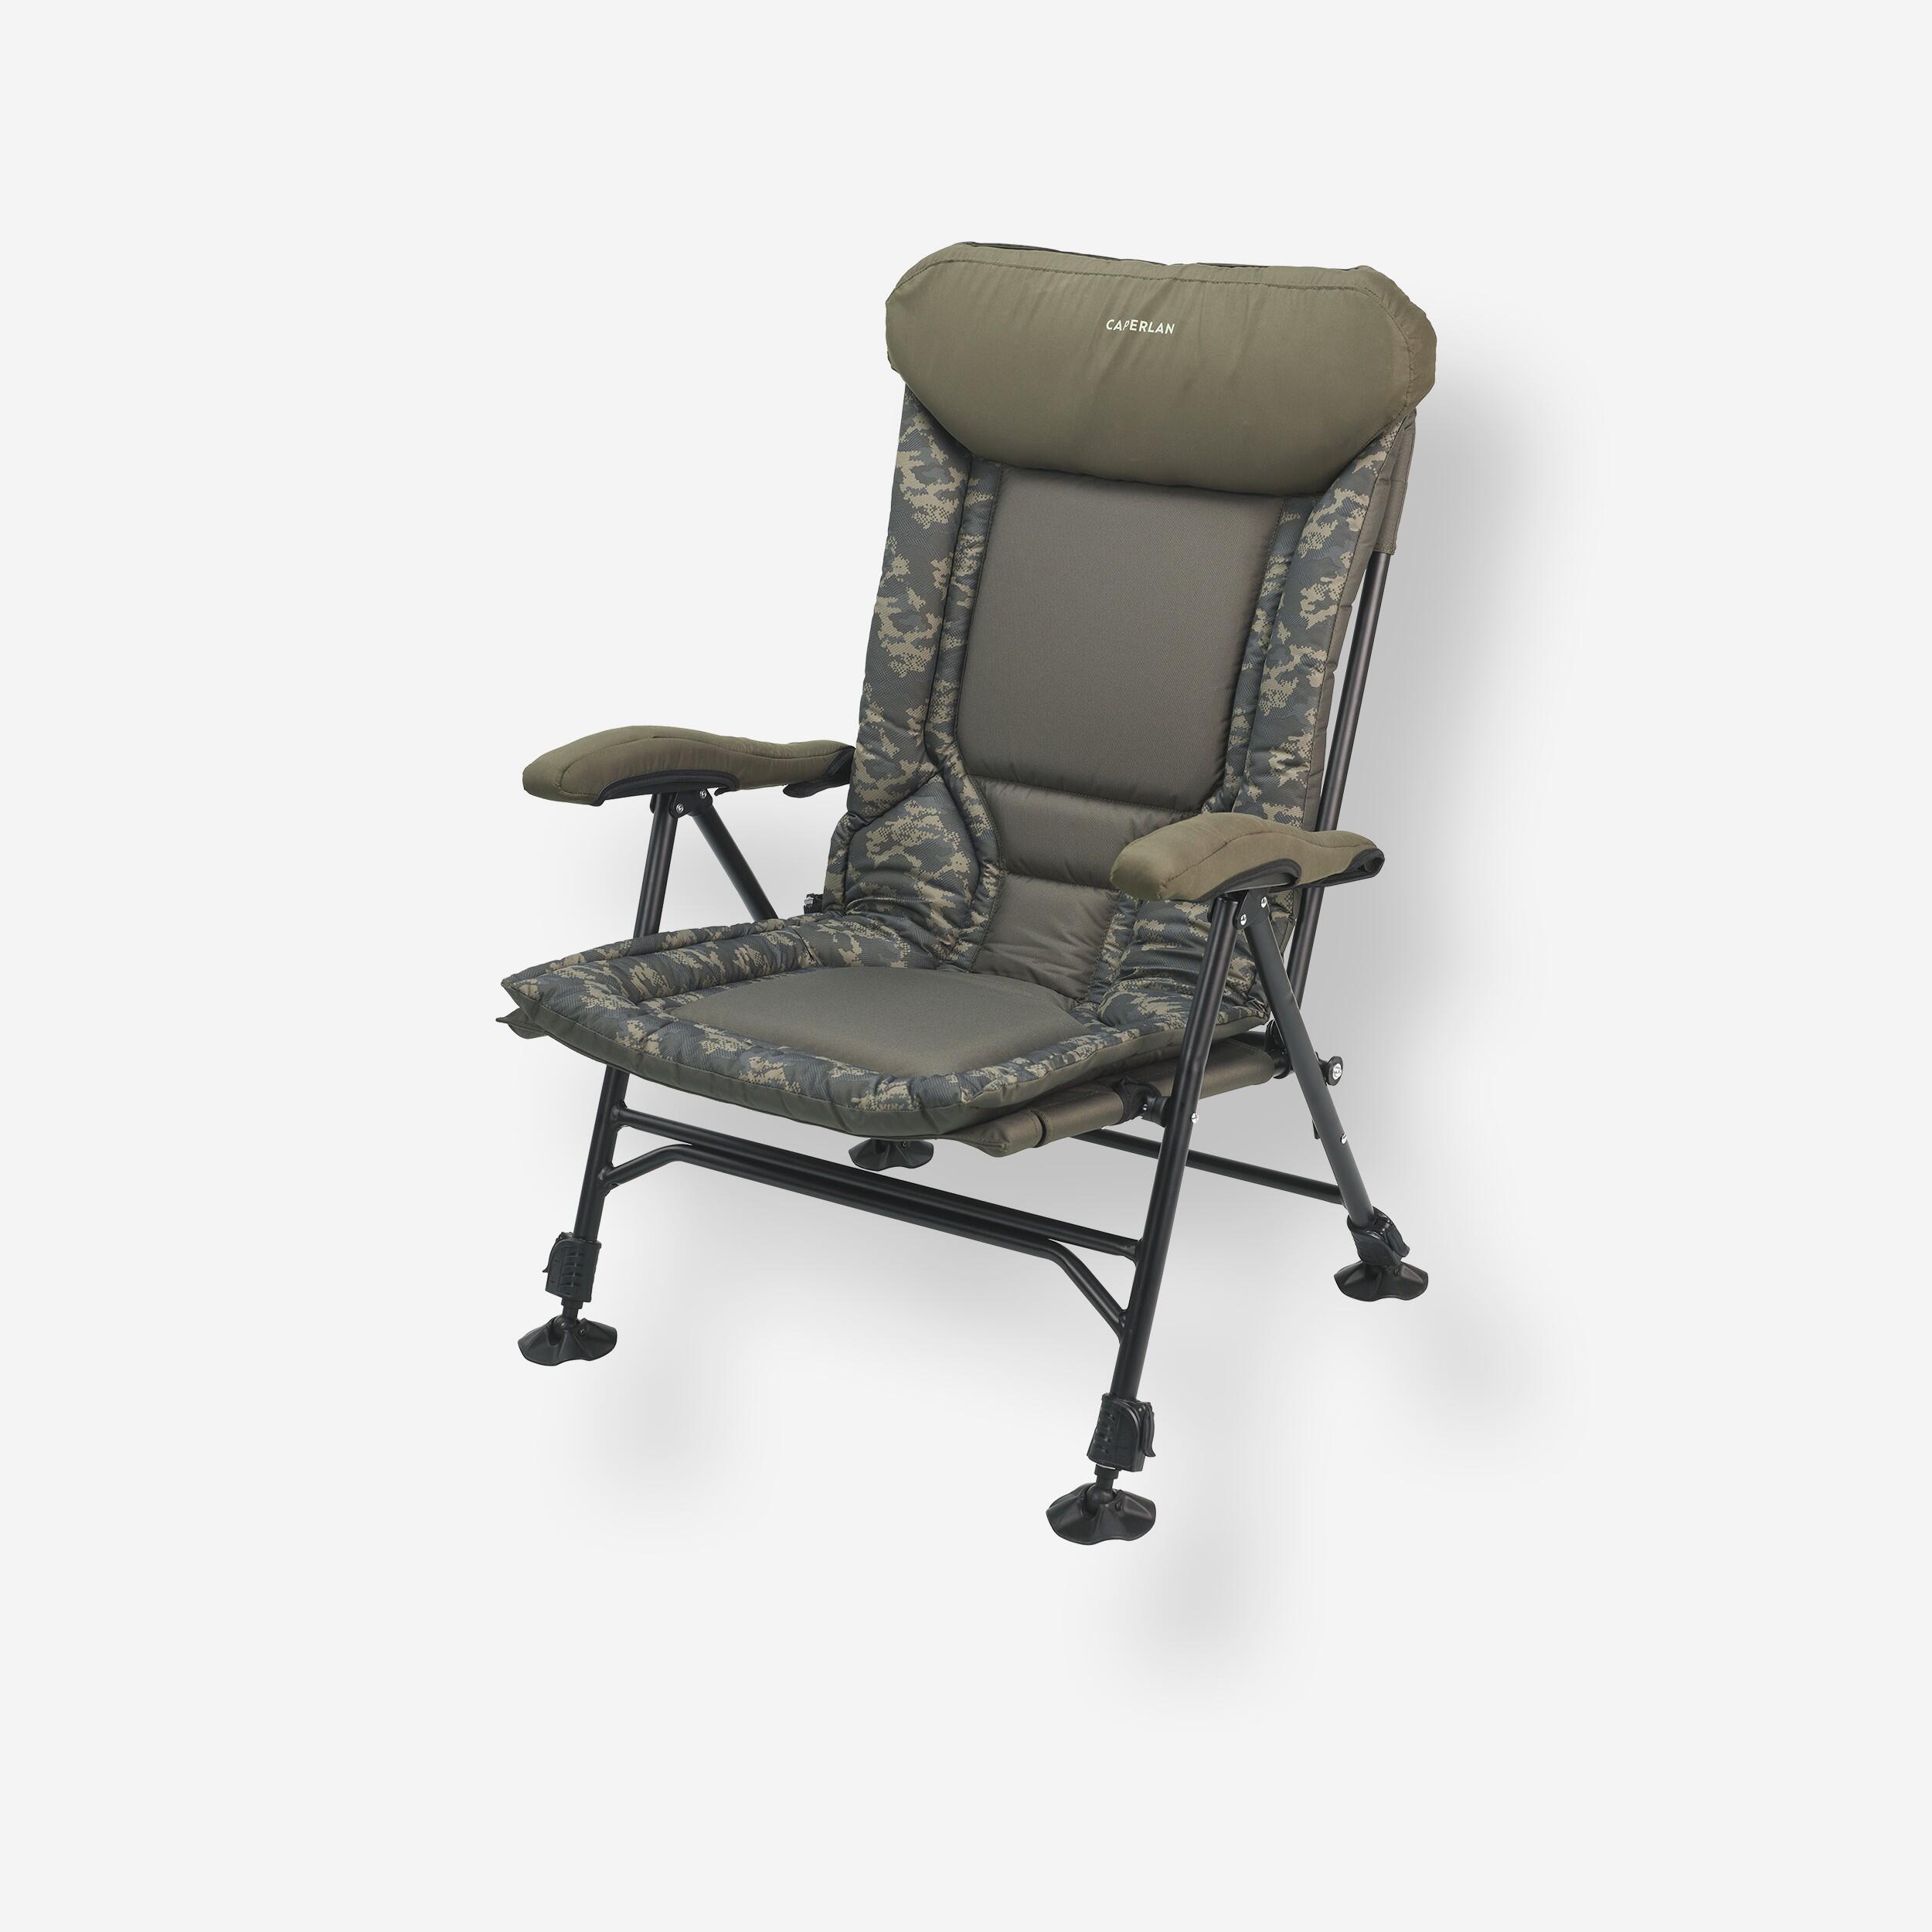 Fishing chairs for Sale